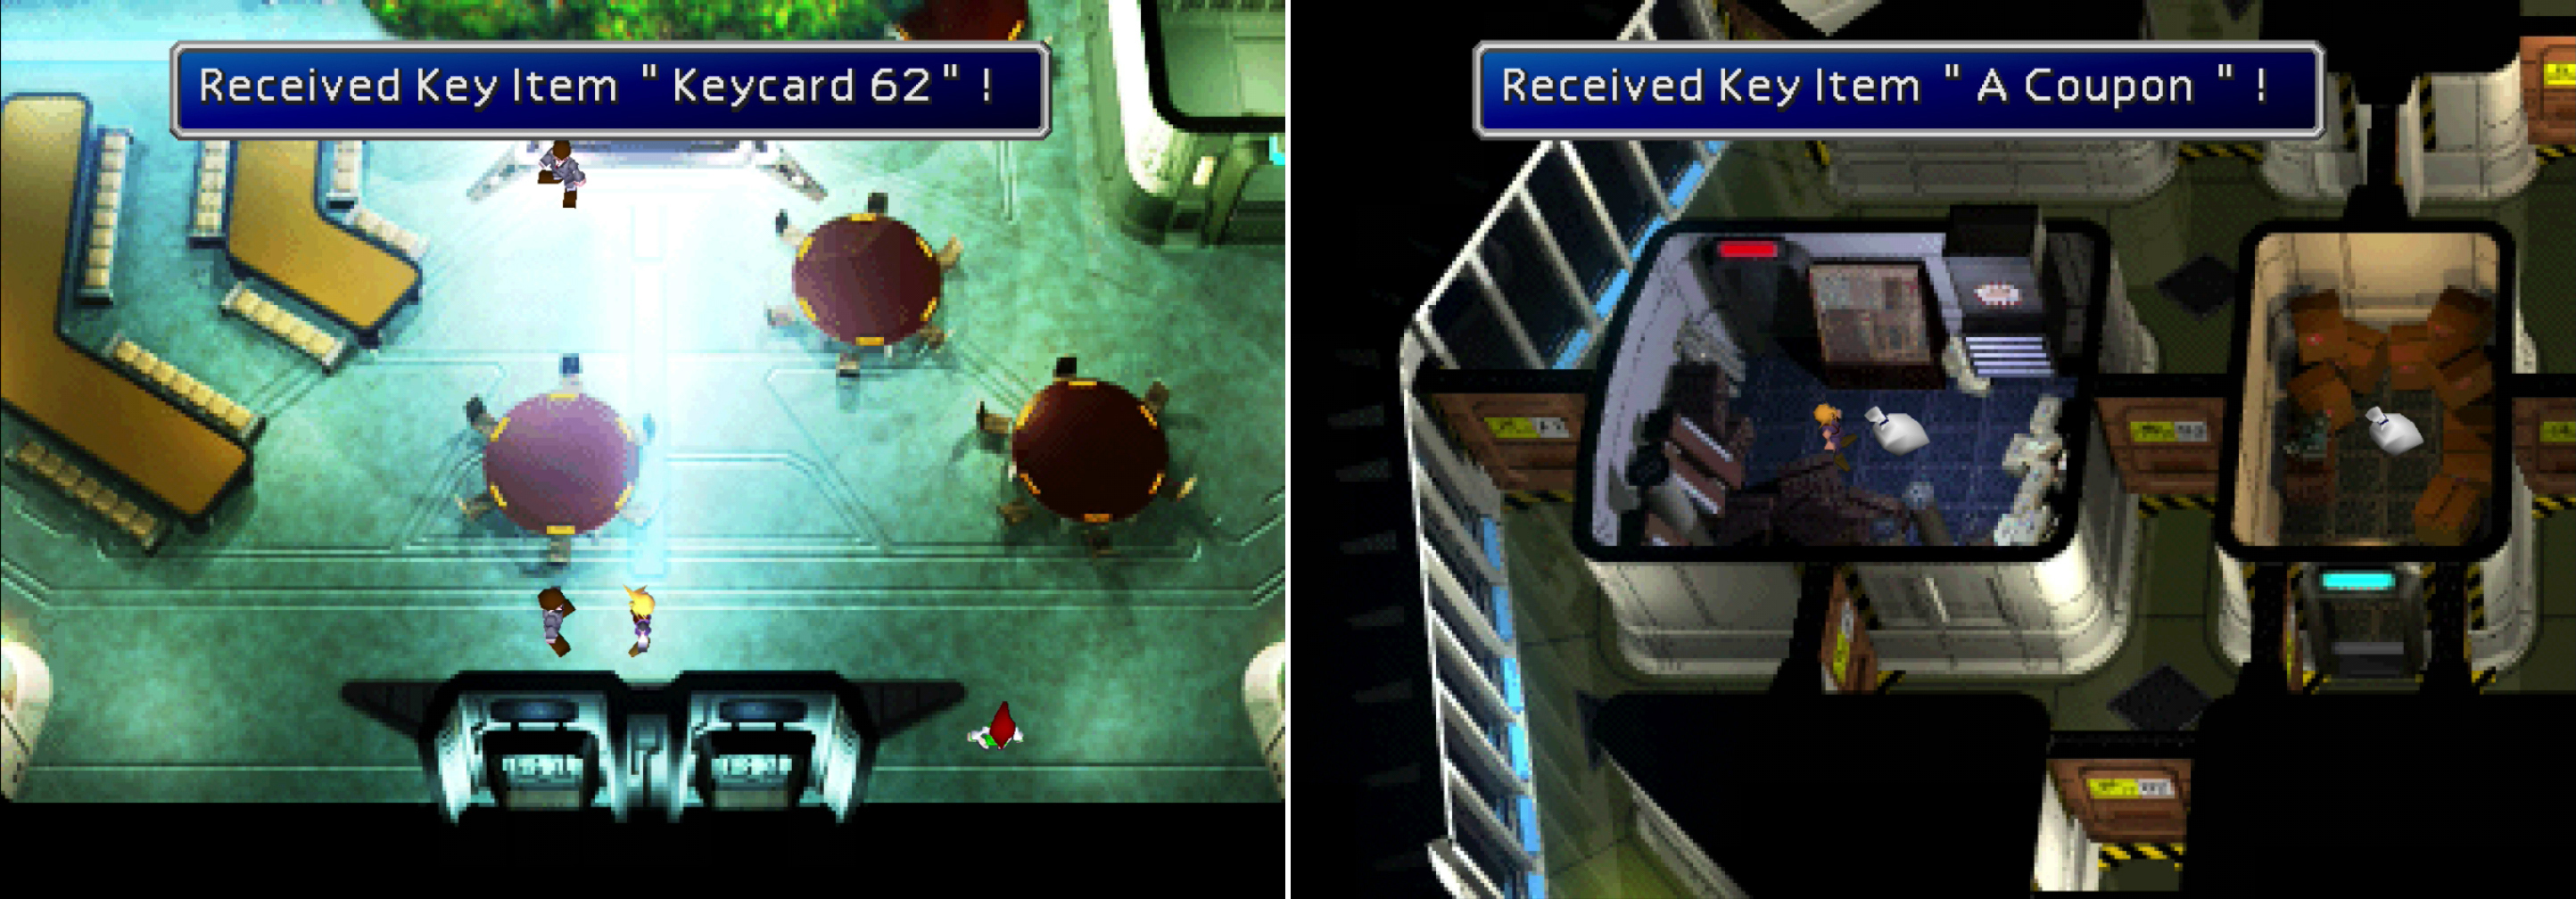 A misinformed Shinra employee will simply hand you his "Keycard 62" if you keep quiet (left). Disregard orders to stay out of the air ducts and claim all three prizes on the 63rd Floor (right).